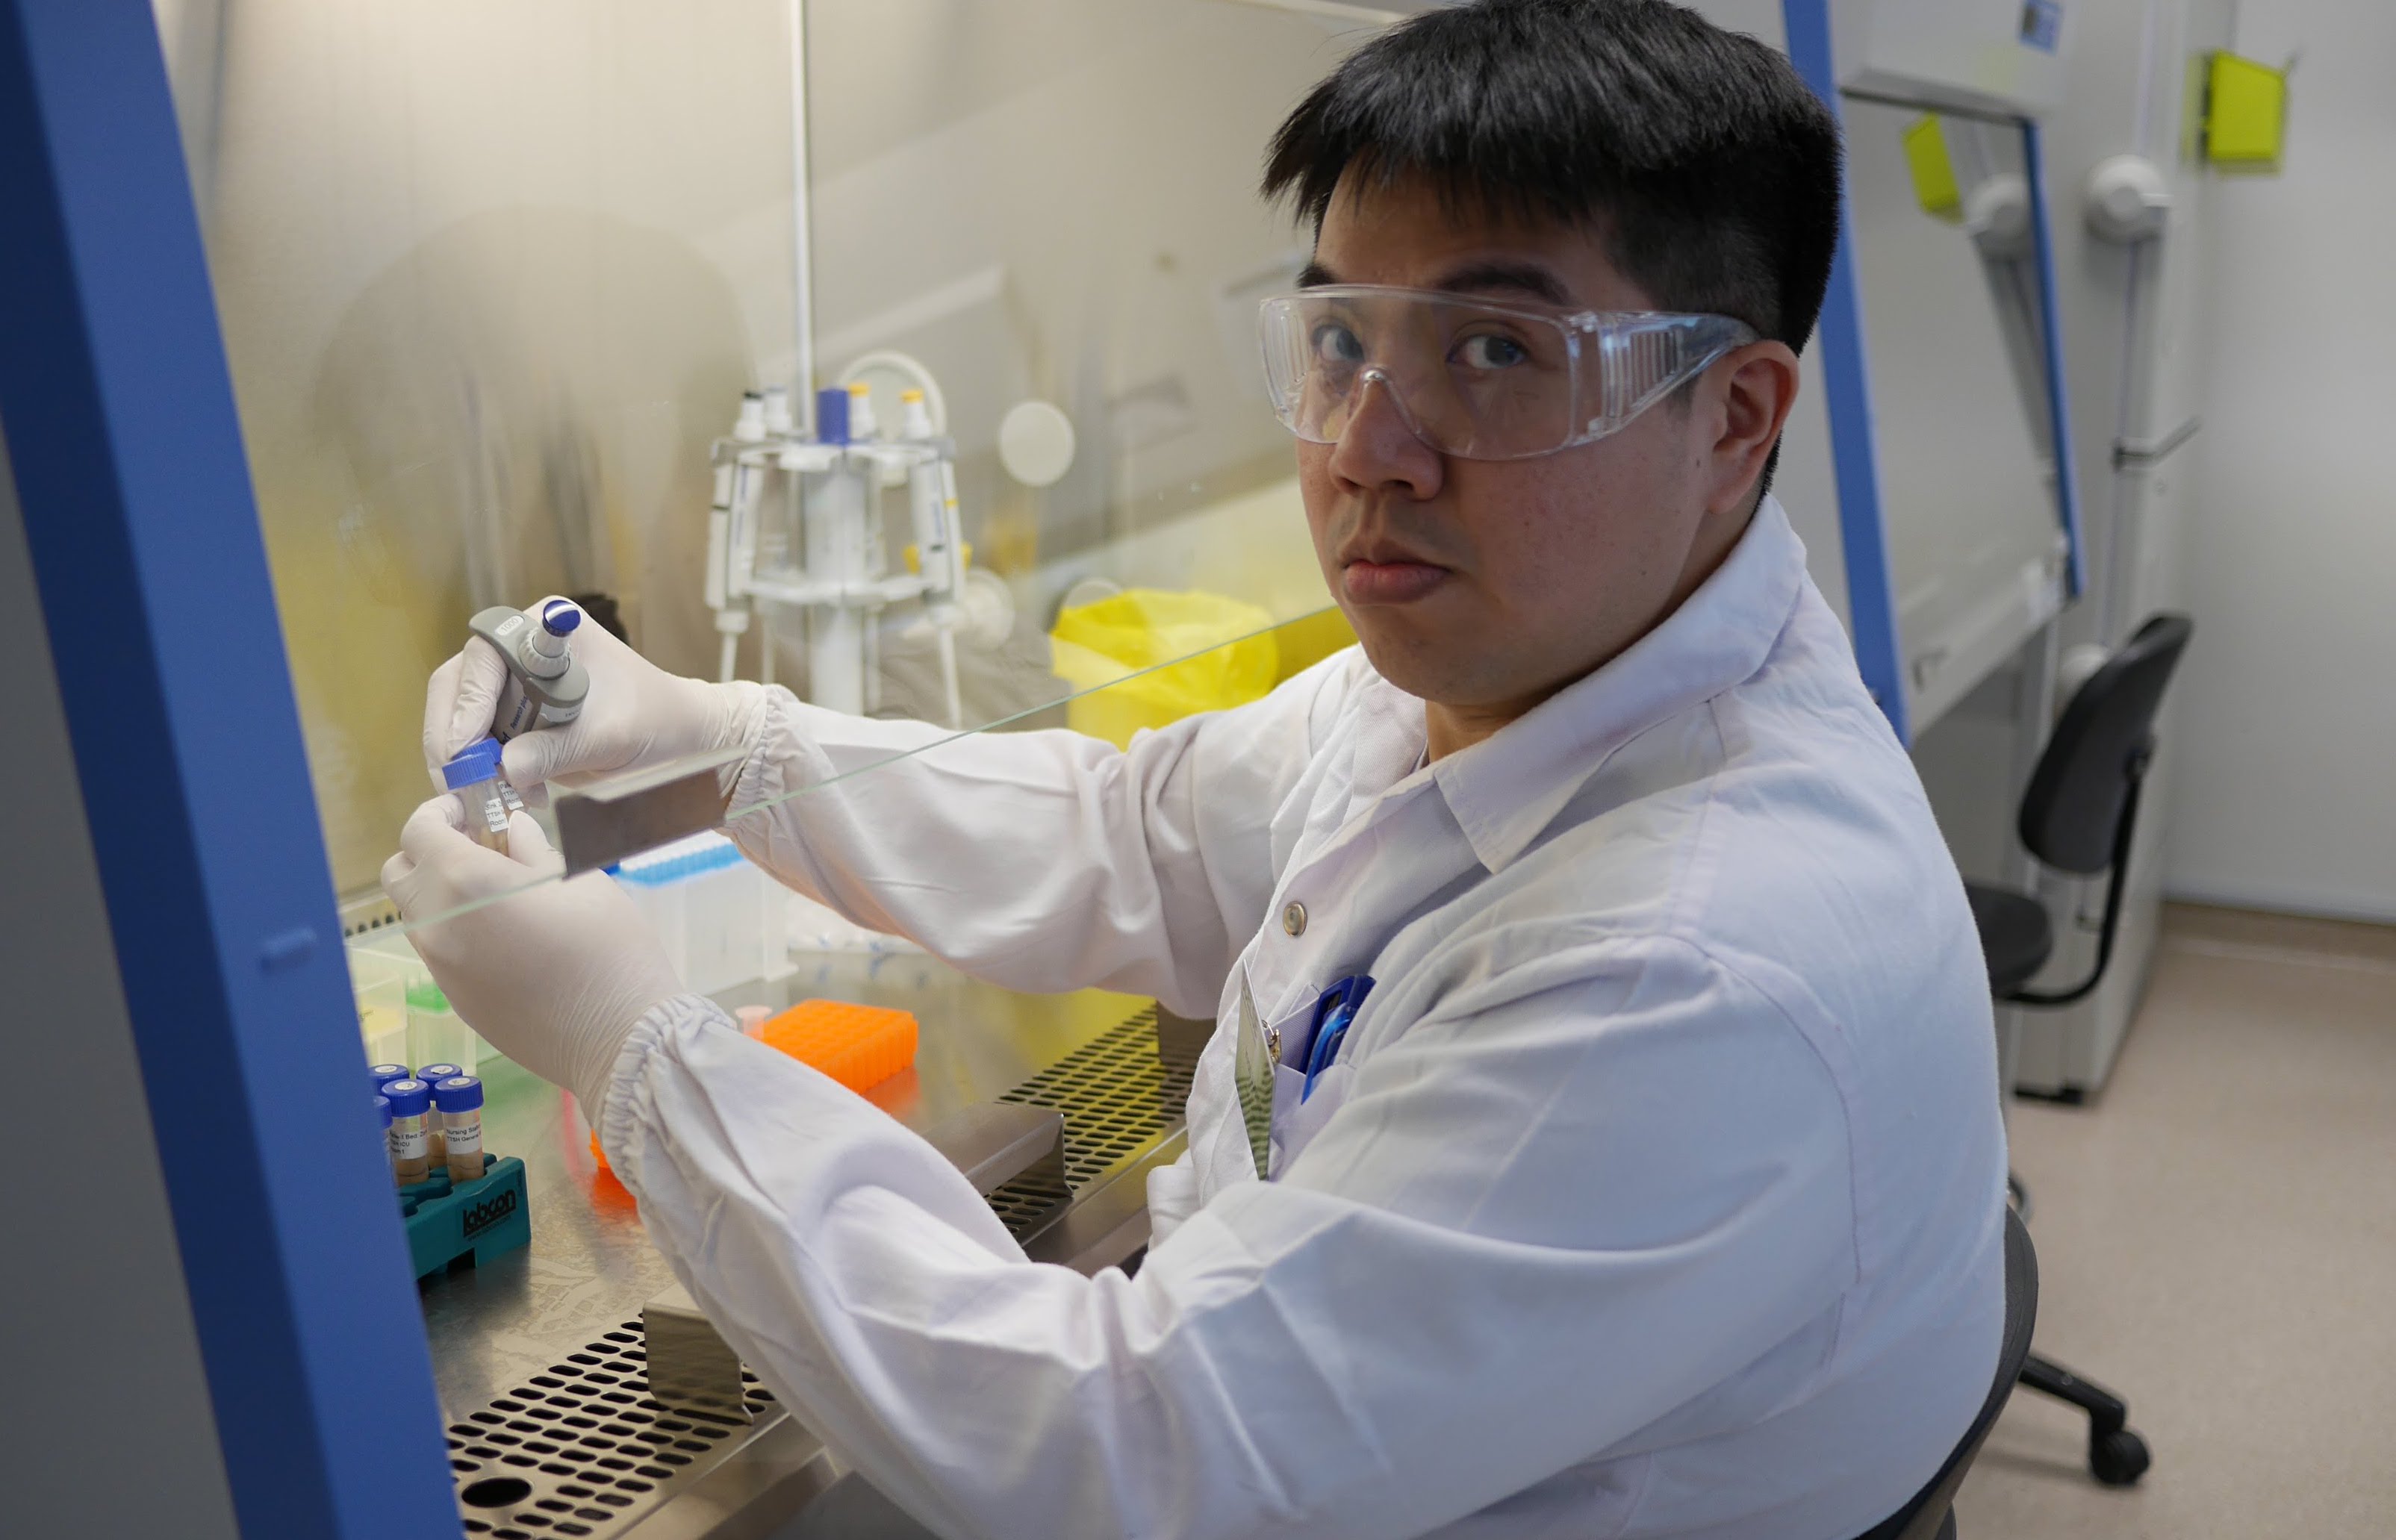 SCELSE researcher Dr. Irvan Luhung performs lab work at a biosafety cabinet in a lab coat and goggles